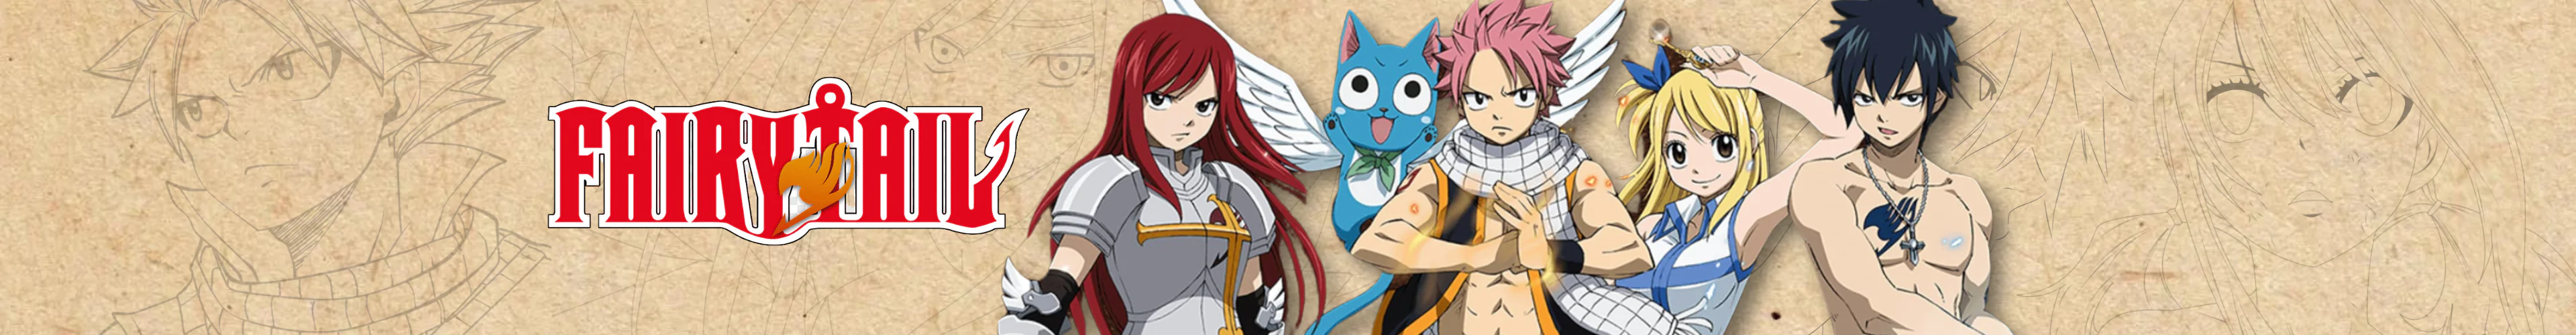 Fairy Tail coin banks banner